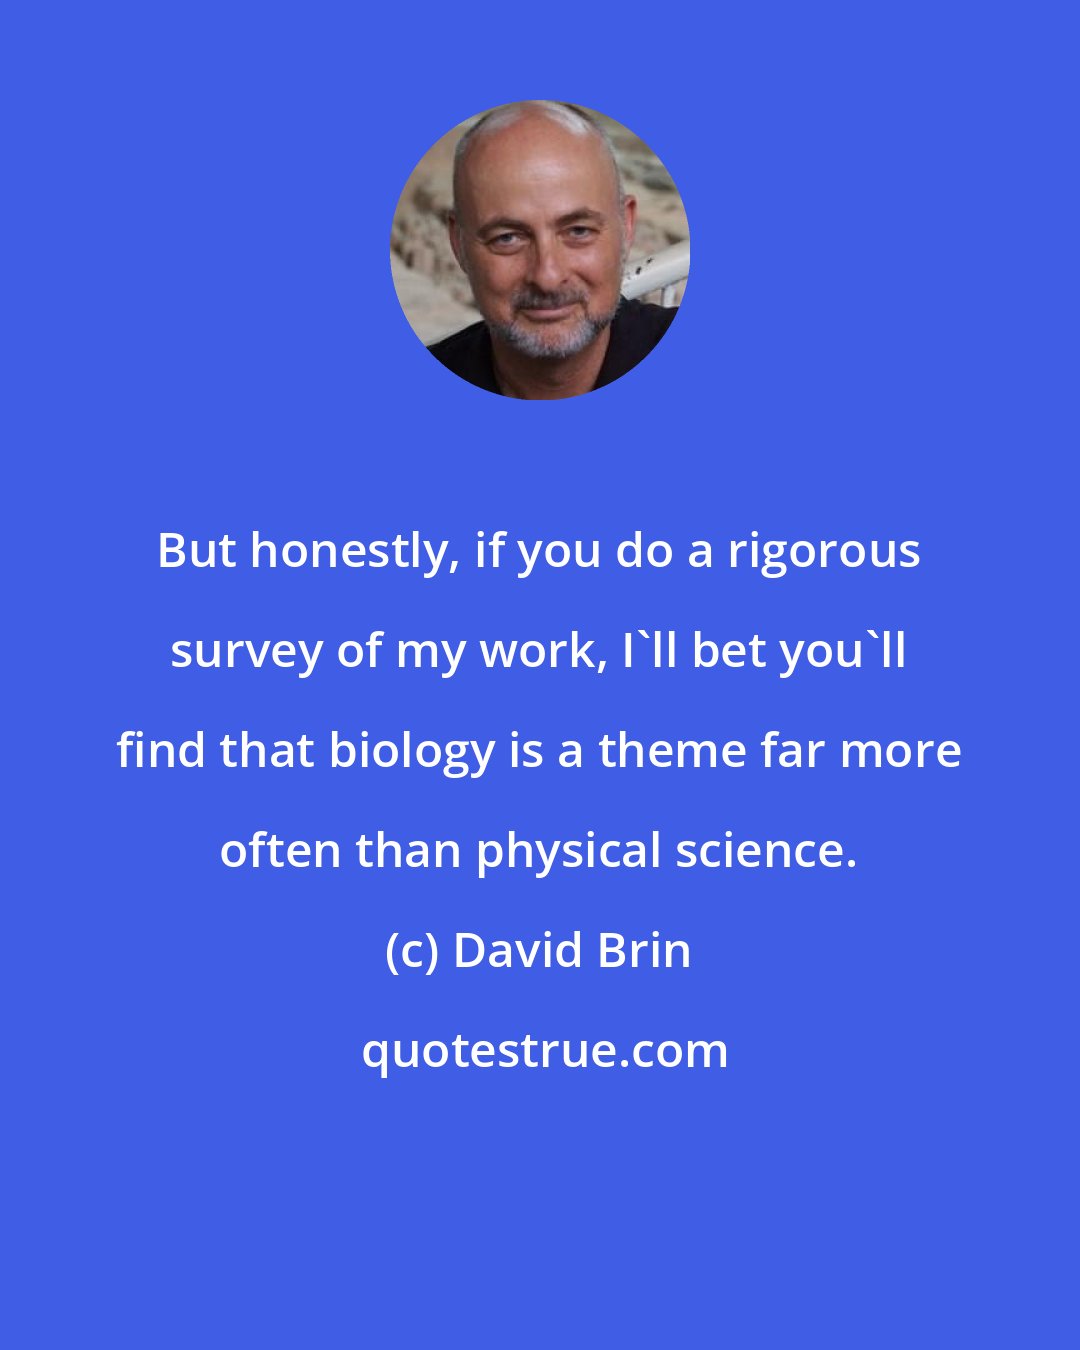 David Brin: But honestly, if you do a rigorous survey of my work, I'll bet you'll find that biology is a theme far more often than physical science.